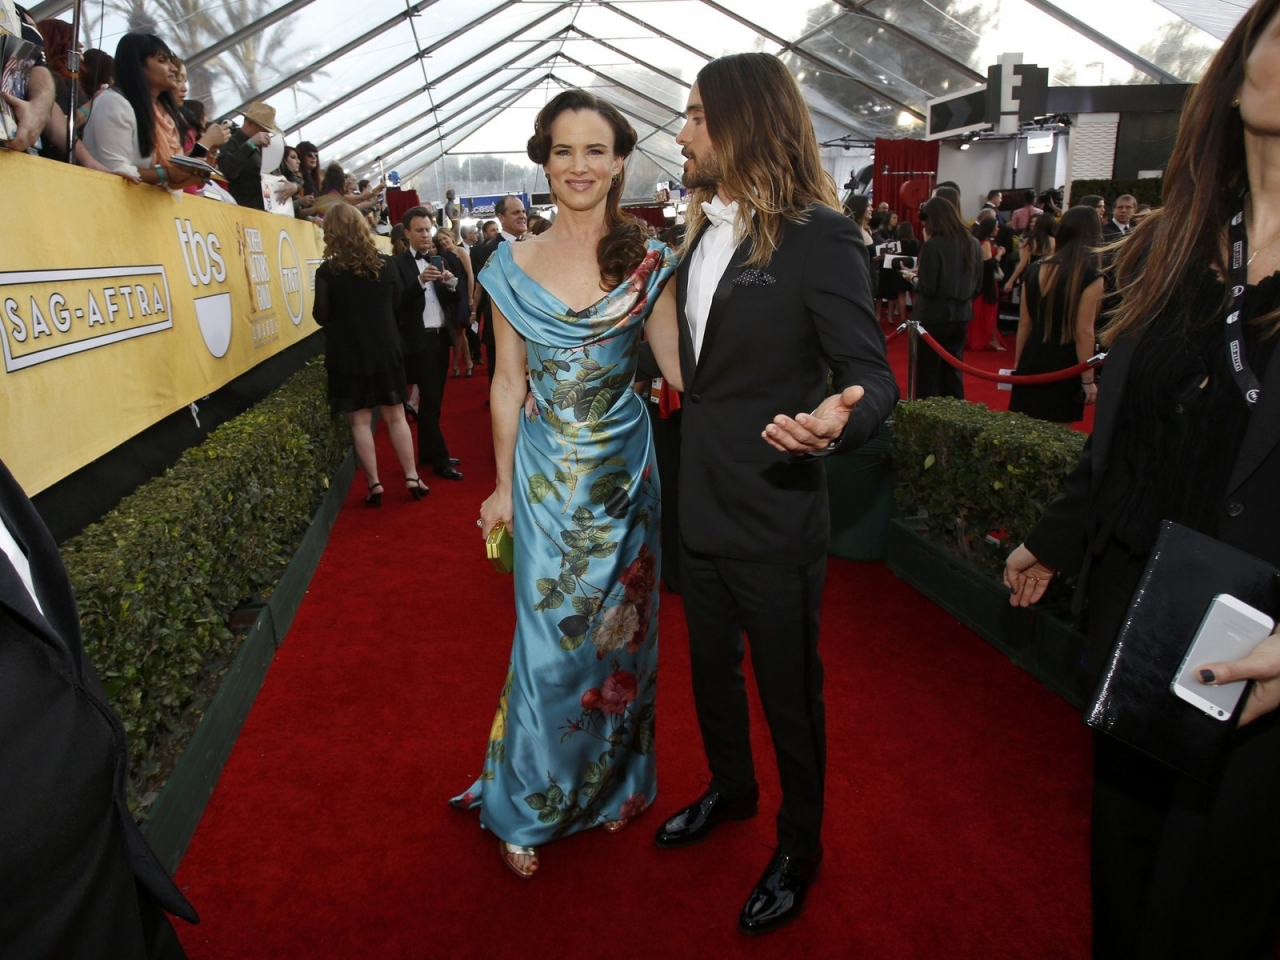 Juliette Lewis and Jared Leto for 1280 x 960 resolution